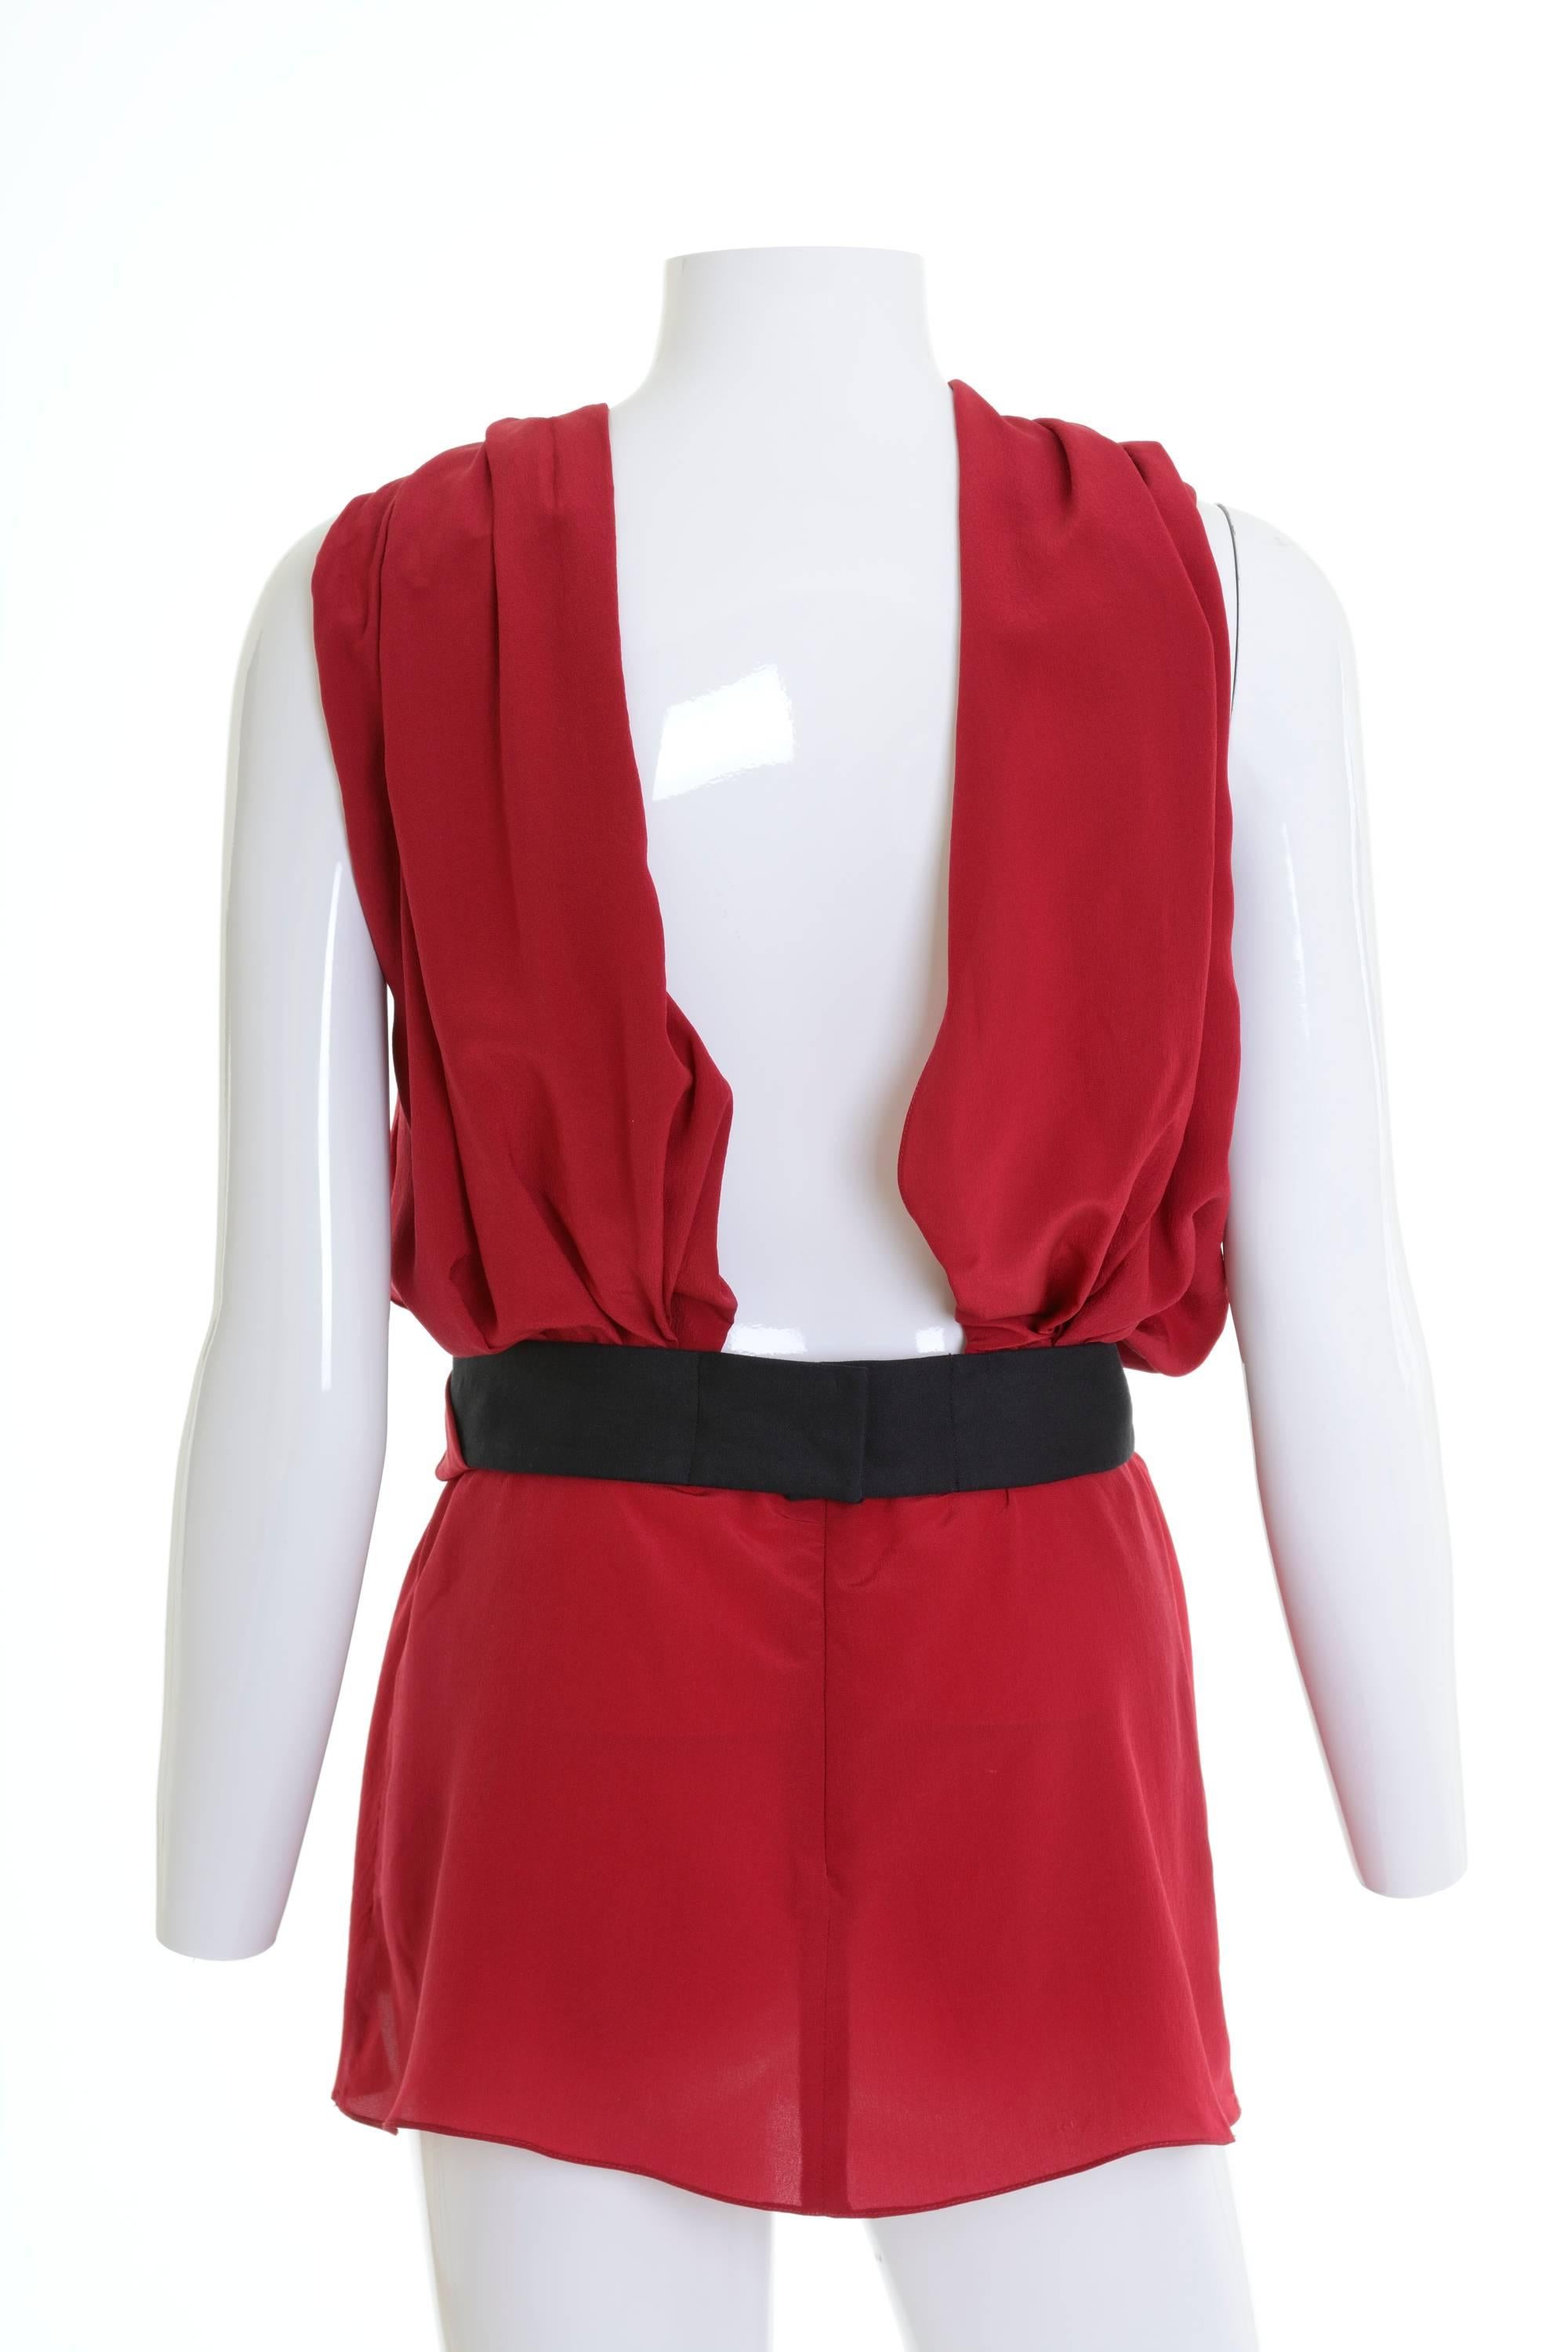 VIONNET Red Draped Mini Dress Blouse In Excellent Condition In Milan, Italy